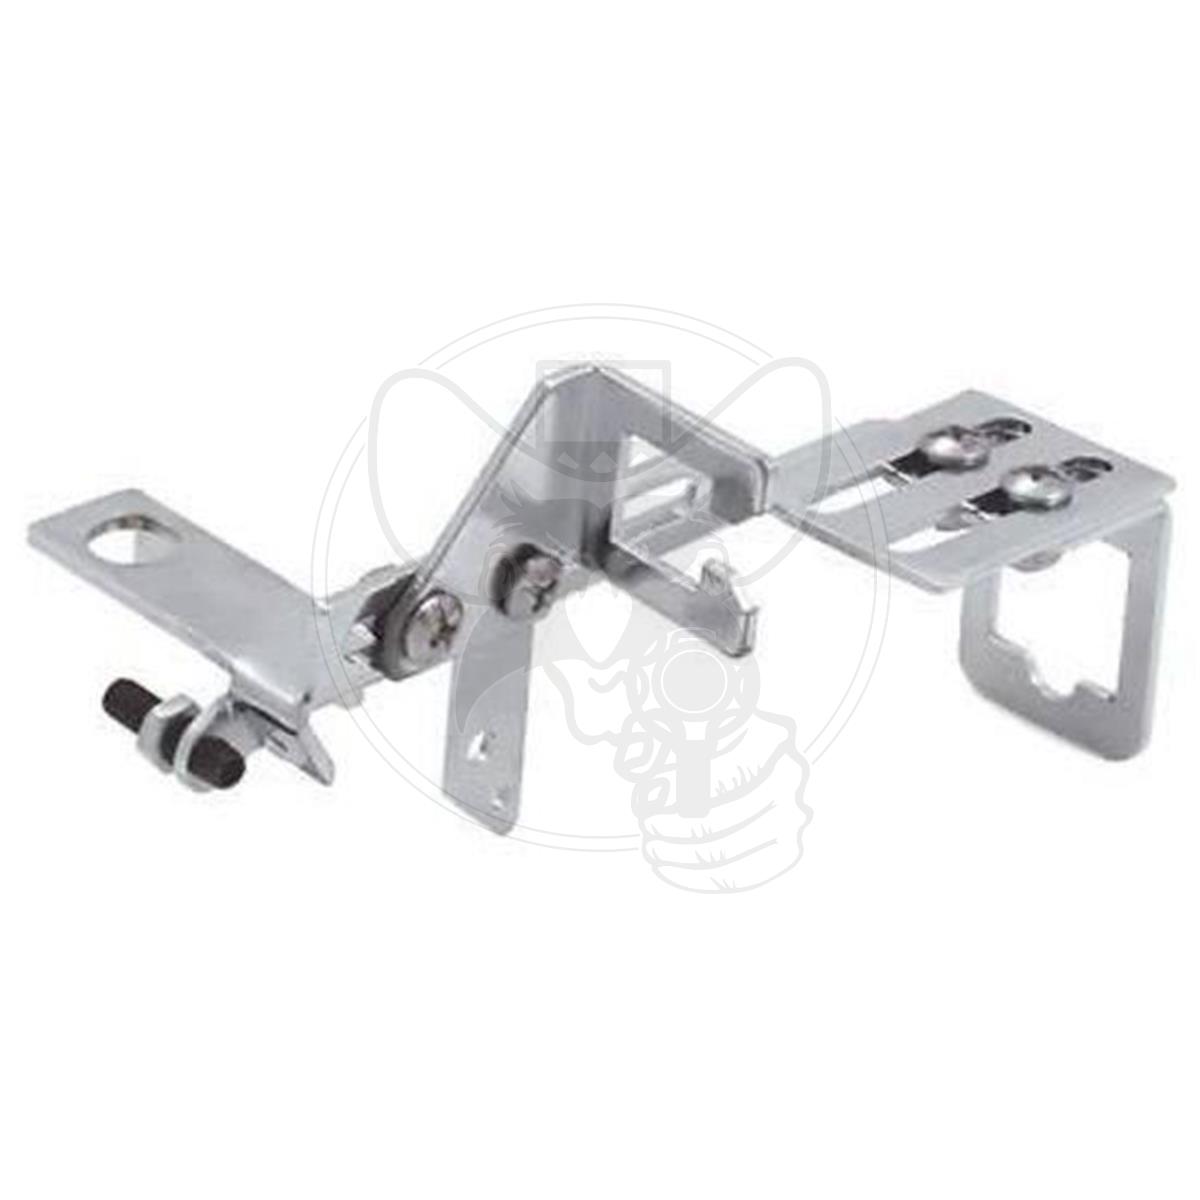 RPC CARBY MOUNTED THROTTLE LINKAGE BRACKET KICKDOWN ADJUSTABLE